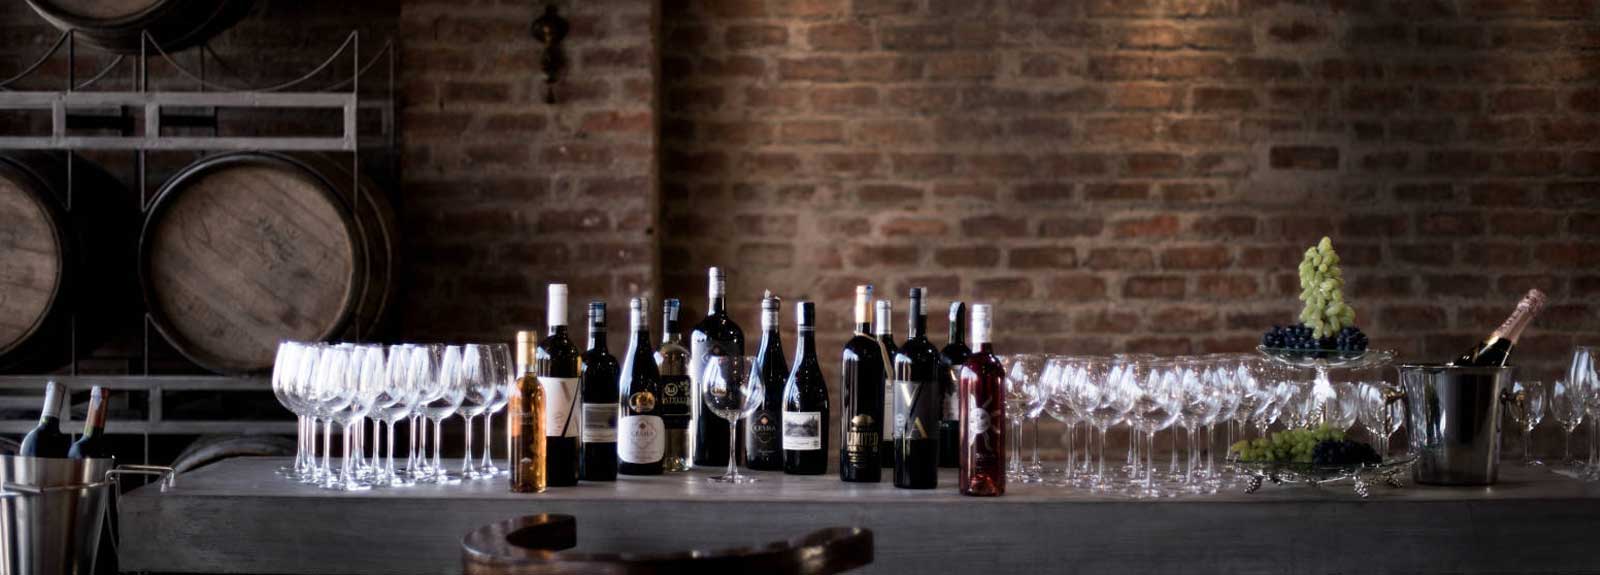 Certified Wine Tasting courses and workshops